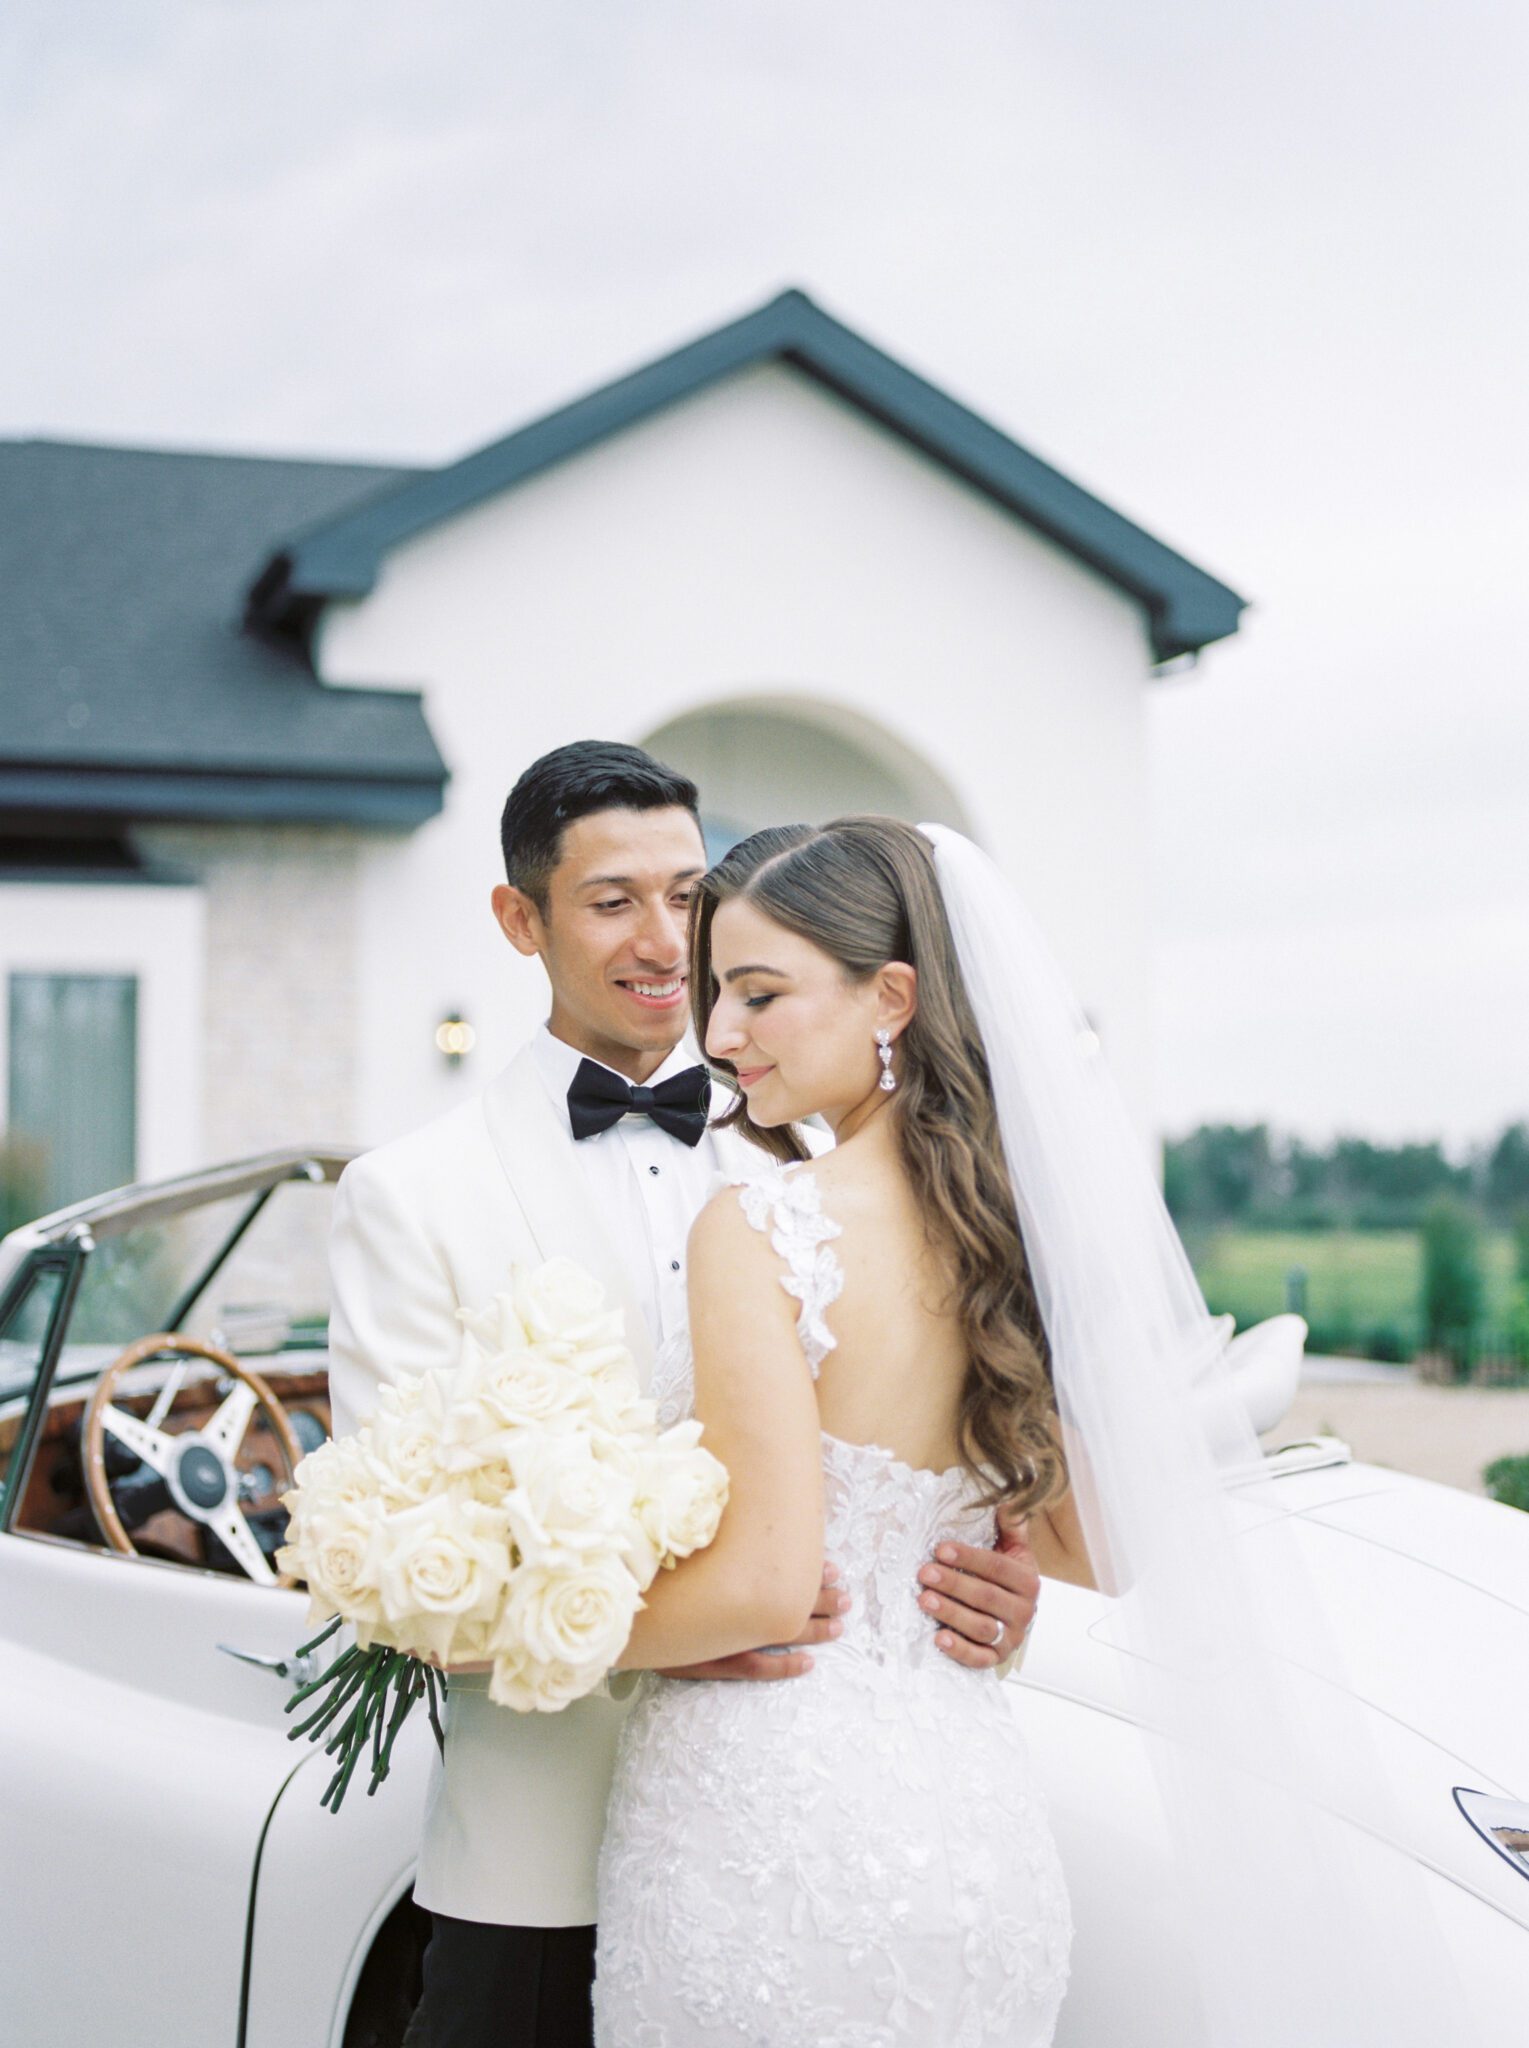 Elegant bride and groom with a vintage car outside of Sparrow Lane Events in Alberta. Classic colour palette of white, blush, and green wedding inspiration.